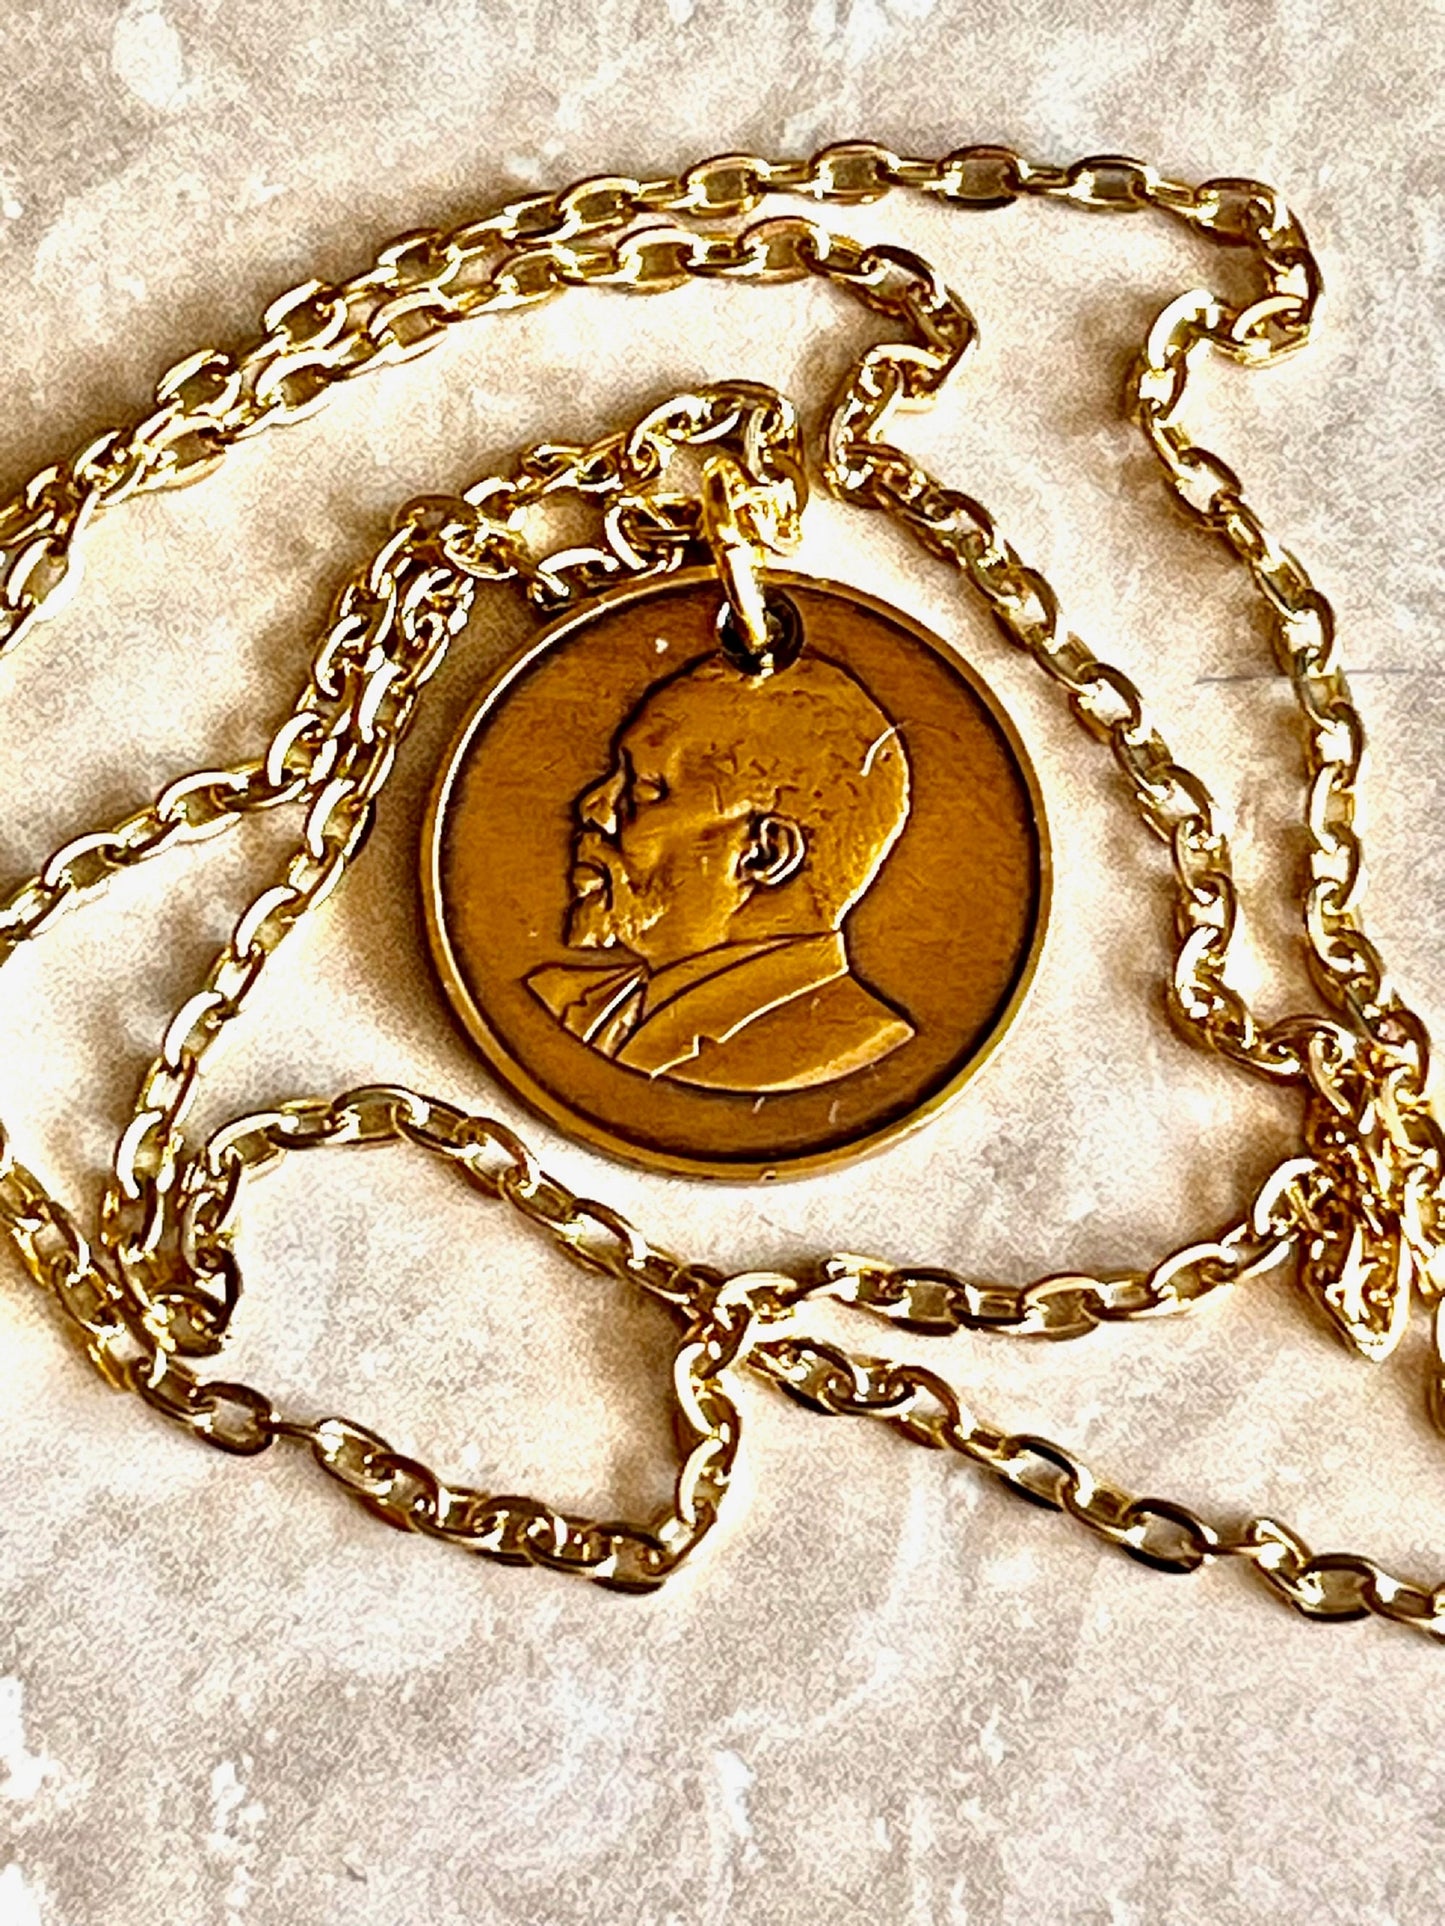 Kenya Coin Pendant Kenyan 5 Shillings Necklace Jewelry Custom Charm Gift For Friend Coin Charm Gift For Him, Her, World Coins Collector